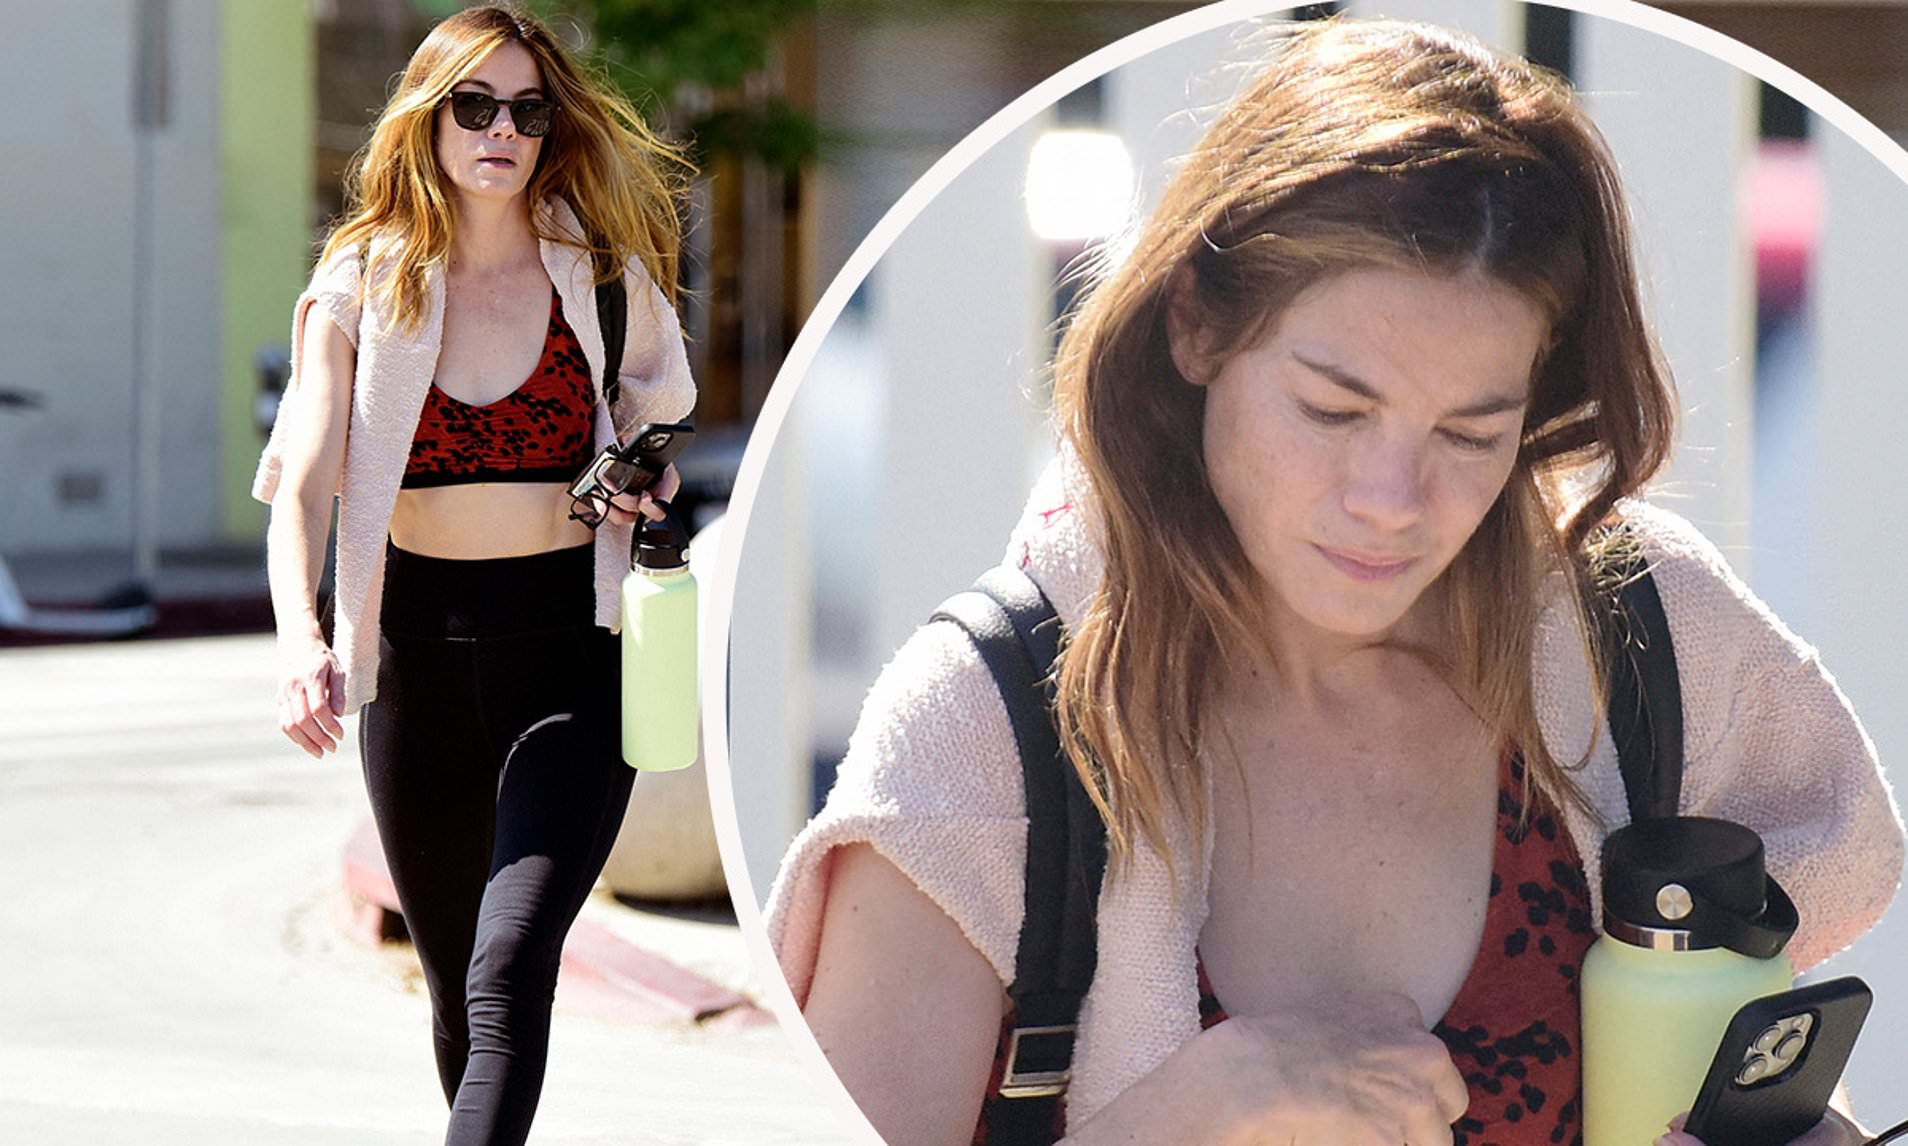 amber kister share michelle monaghan weight photos